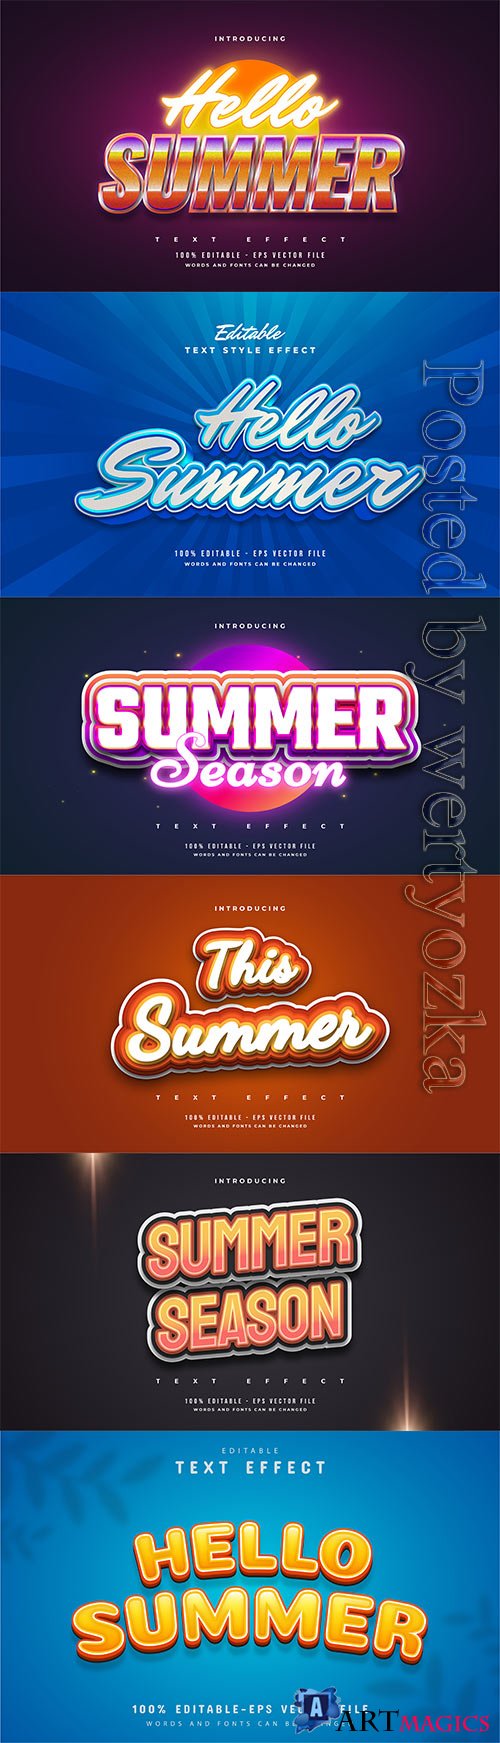 Summer season text in colorful style editable vector text effect